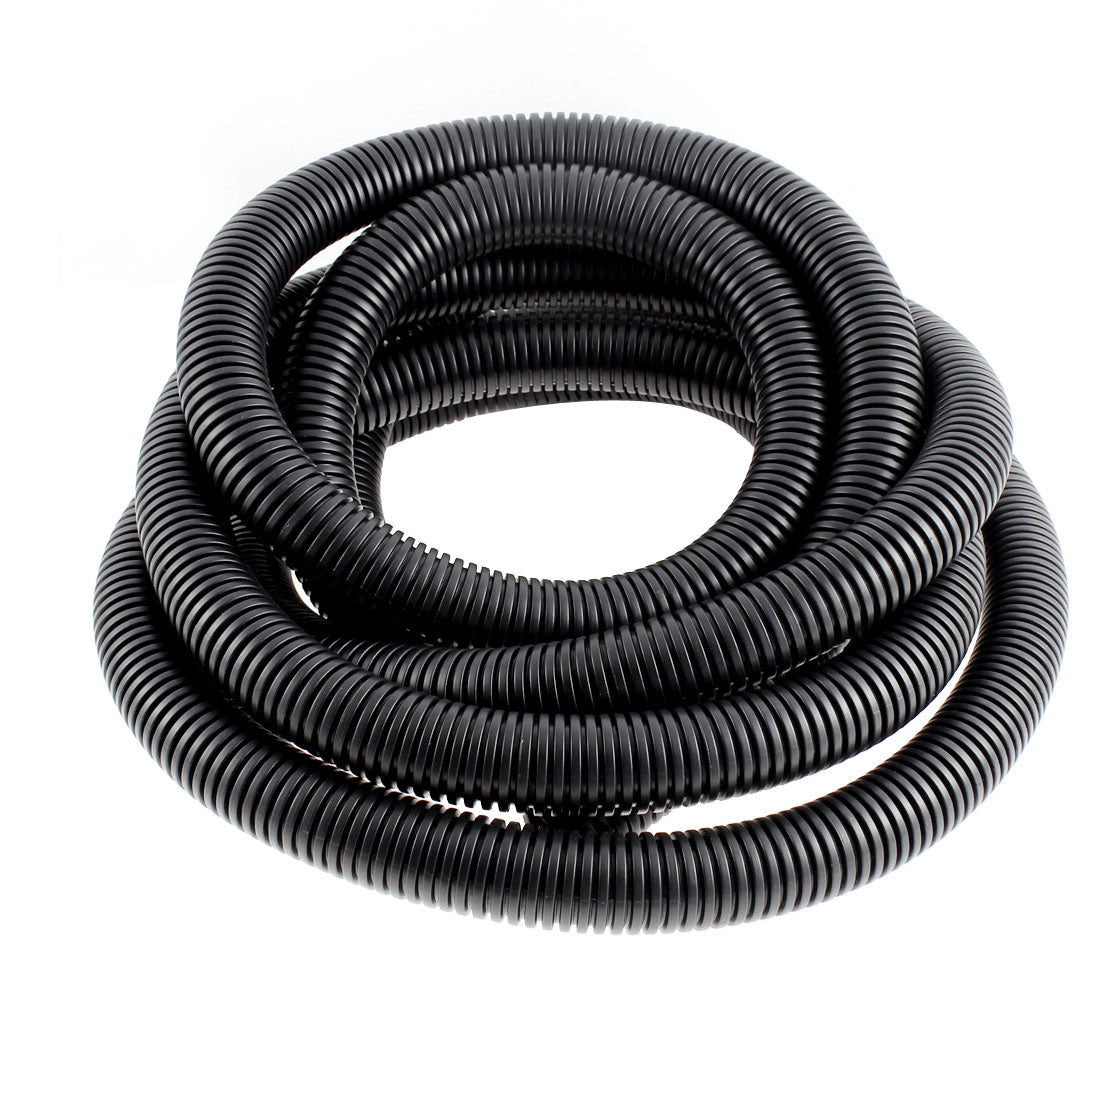 uxcell Uxcell 4.95 M 23 x 28.5 mm Plastic Corrugated Conduit Tube for Garden,Office Black